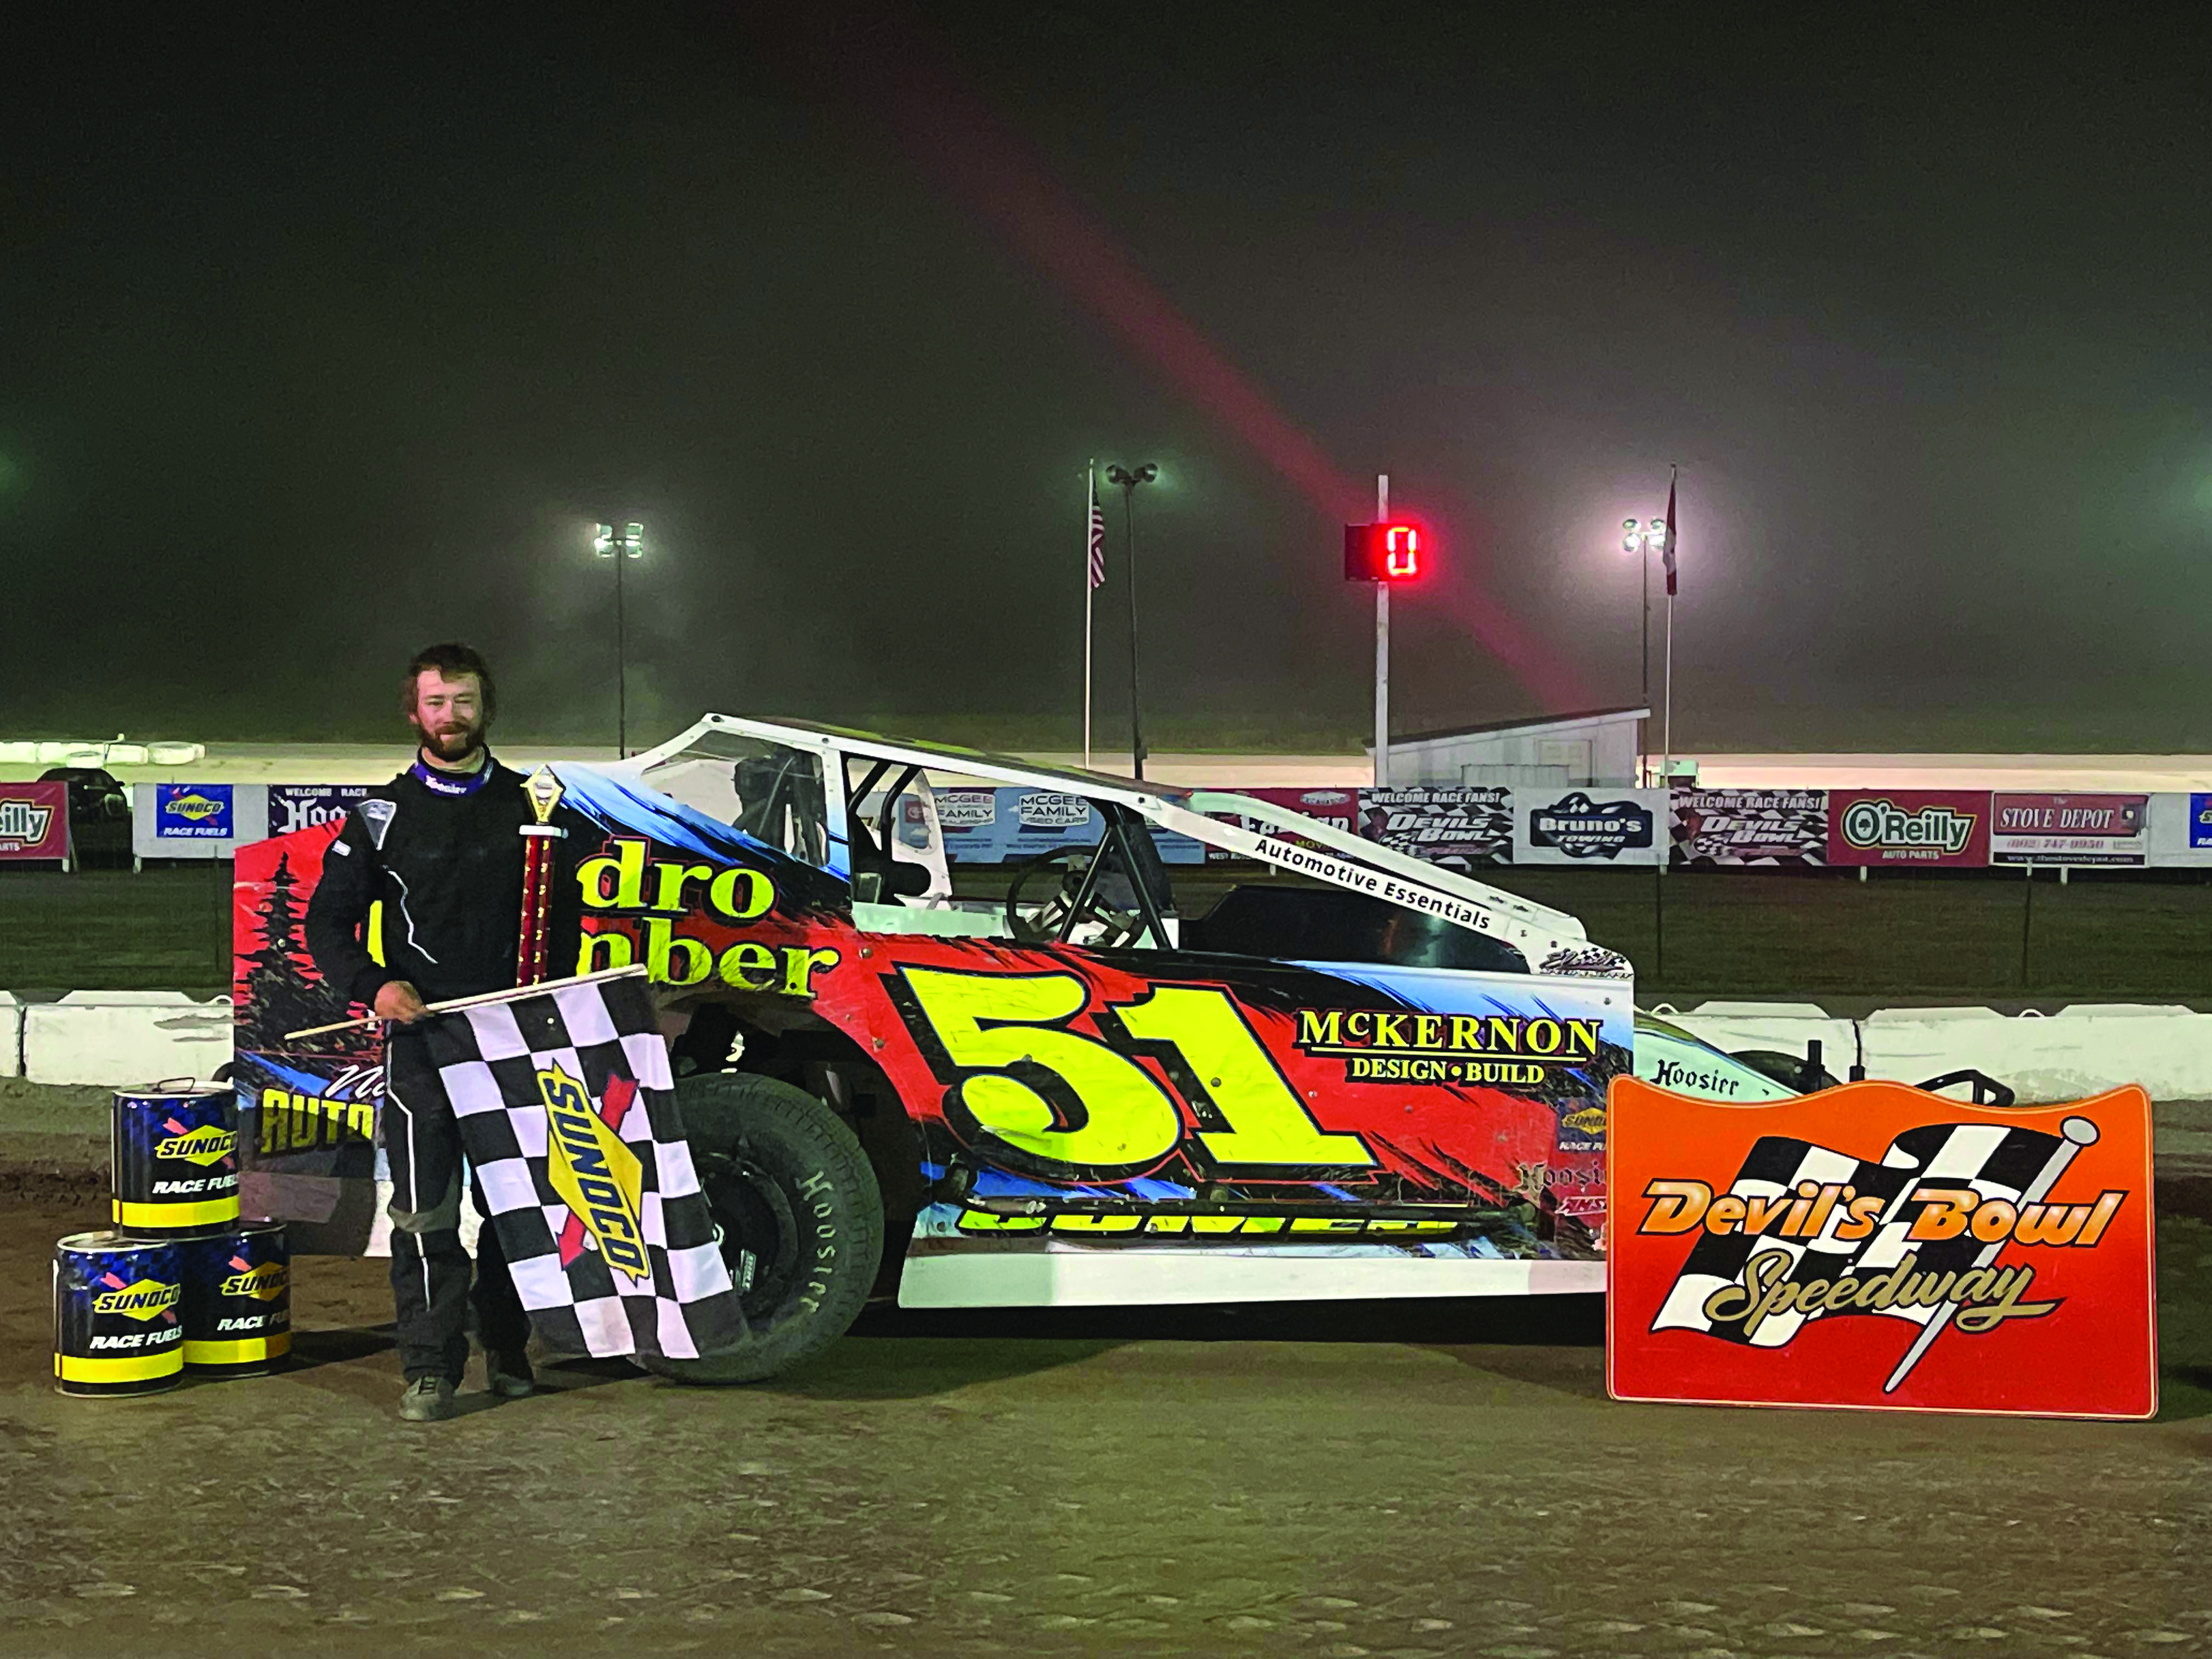 Justin Comes busts out for back-to-back wins at Devil’s Bowl